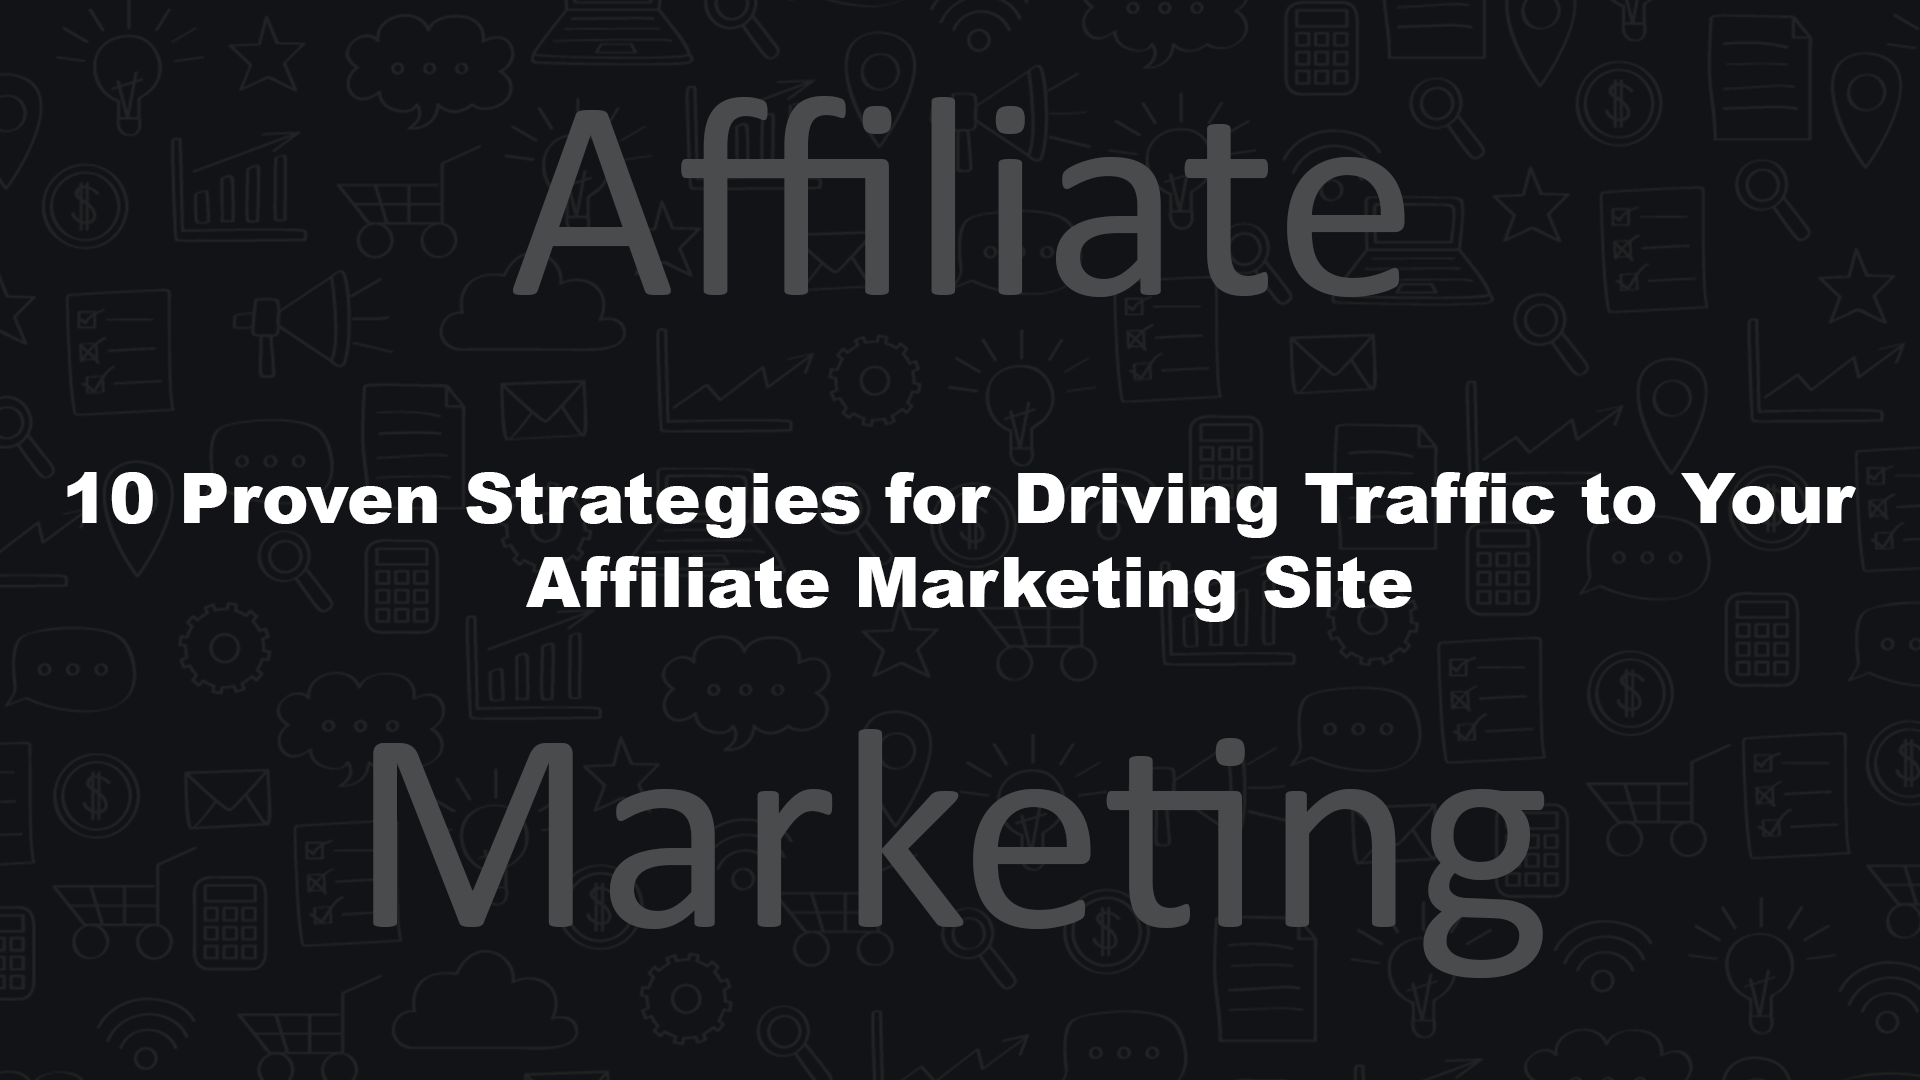 10 Proven Strategies for Driving Traffic to Your Affiliate Marketing Site